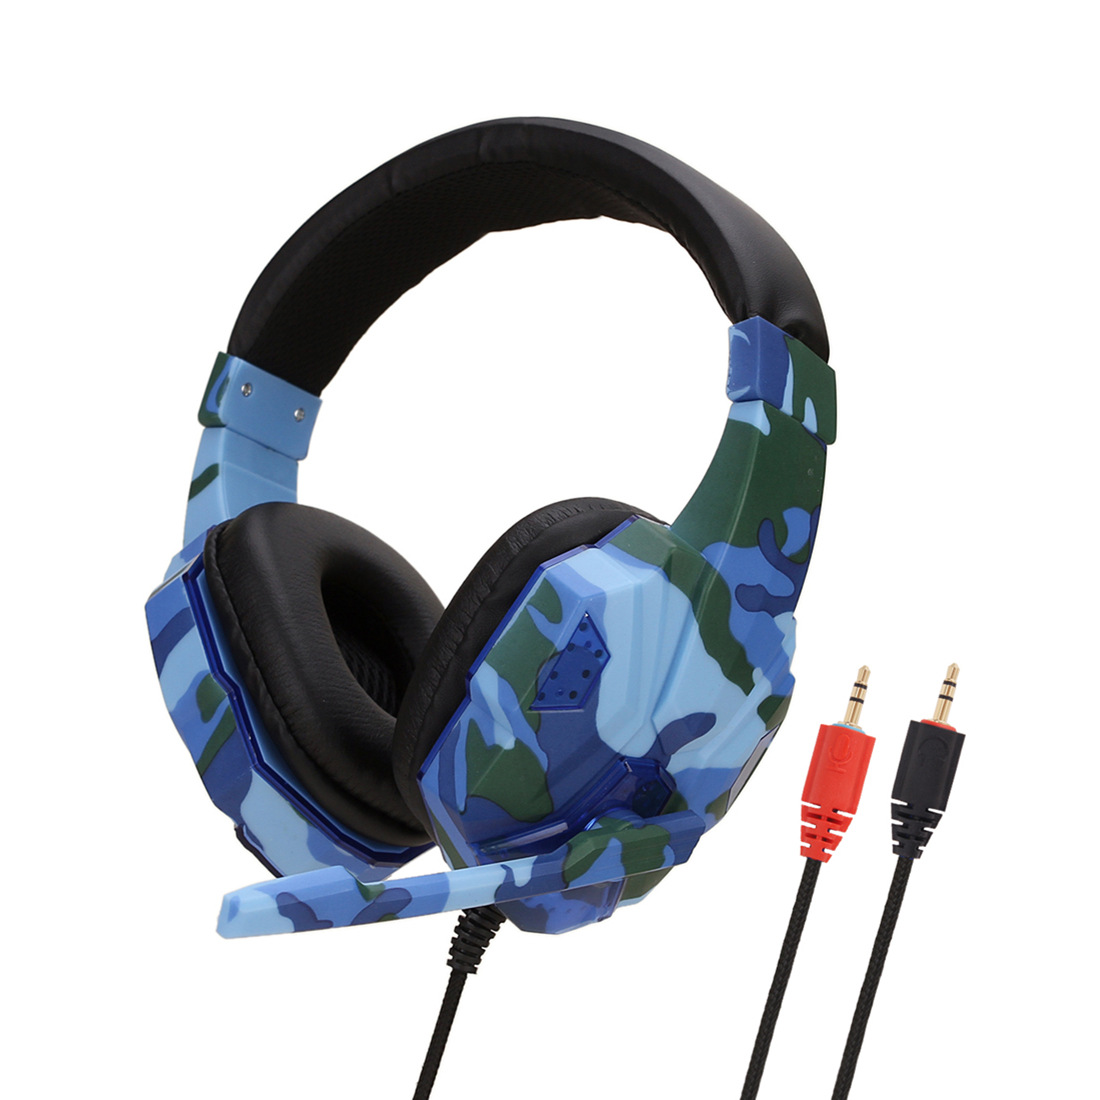 Earphone Gaming Headset Camouflage Headphones with Microphone for PC Laptop